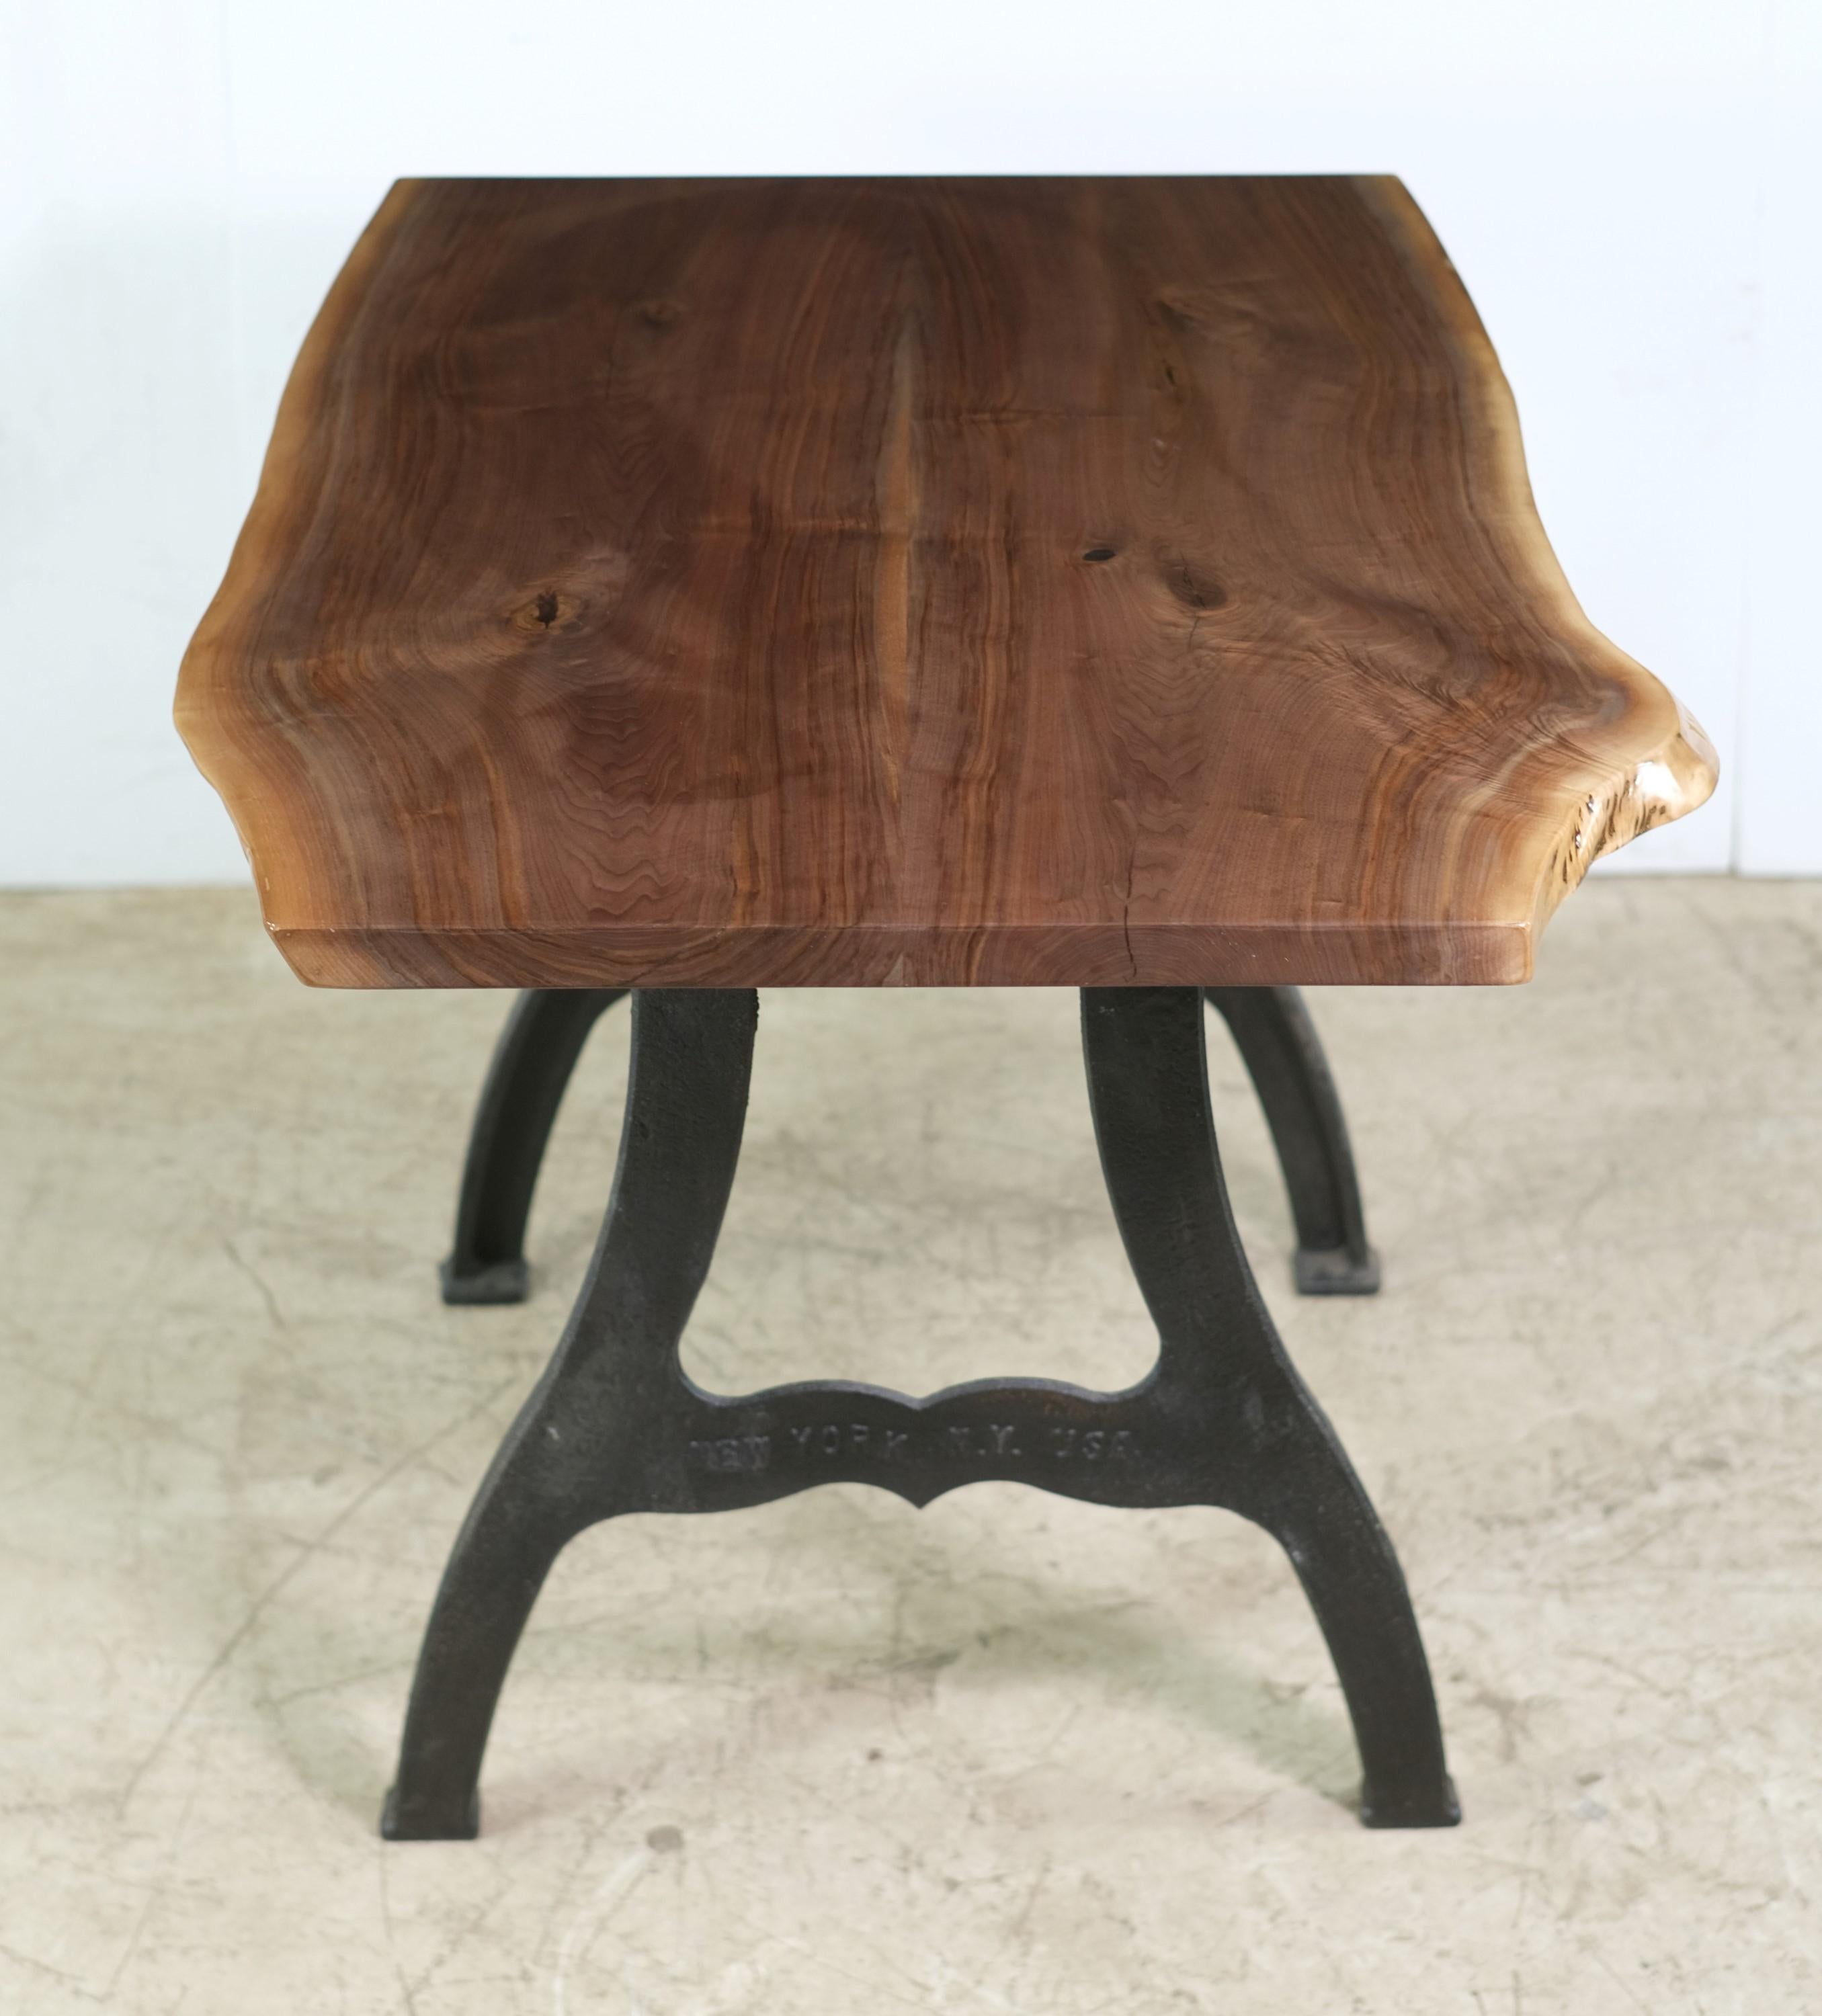 This table features a two slab live edge solid walnut top paired with New York, NY Industrial style cast iron legs. This table is ready to ship. Please note, this item is located in our Scranton, PA location.